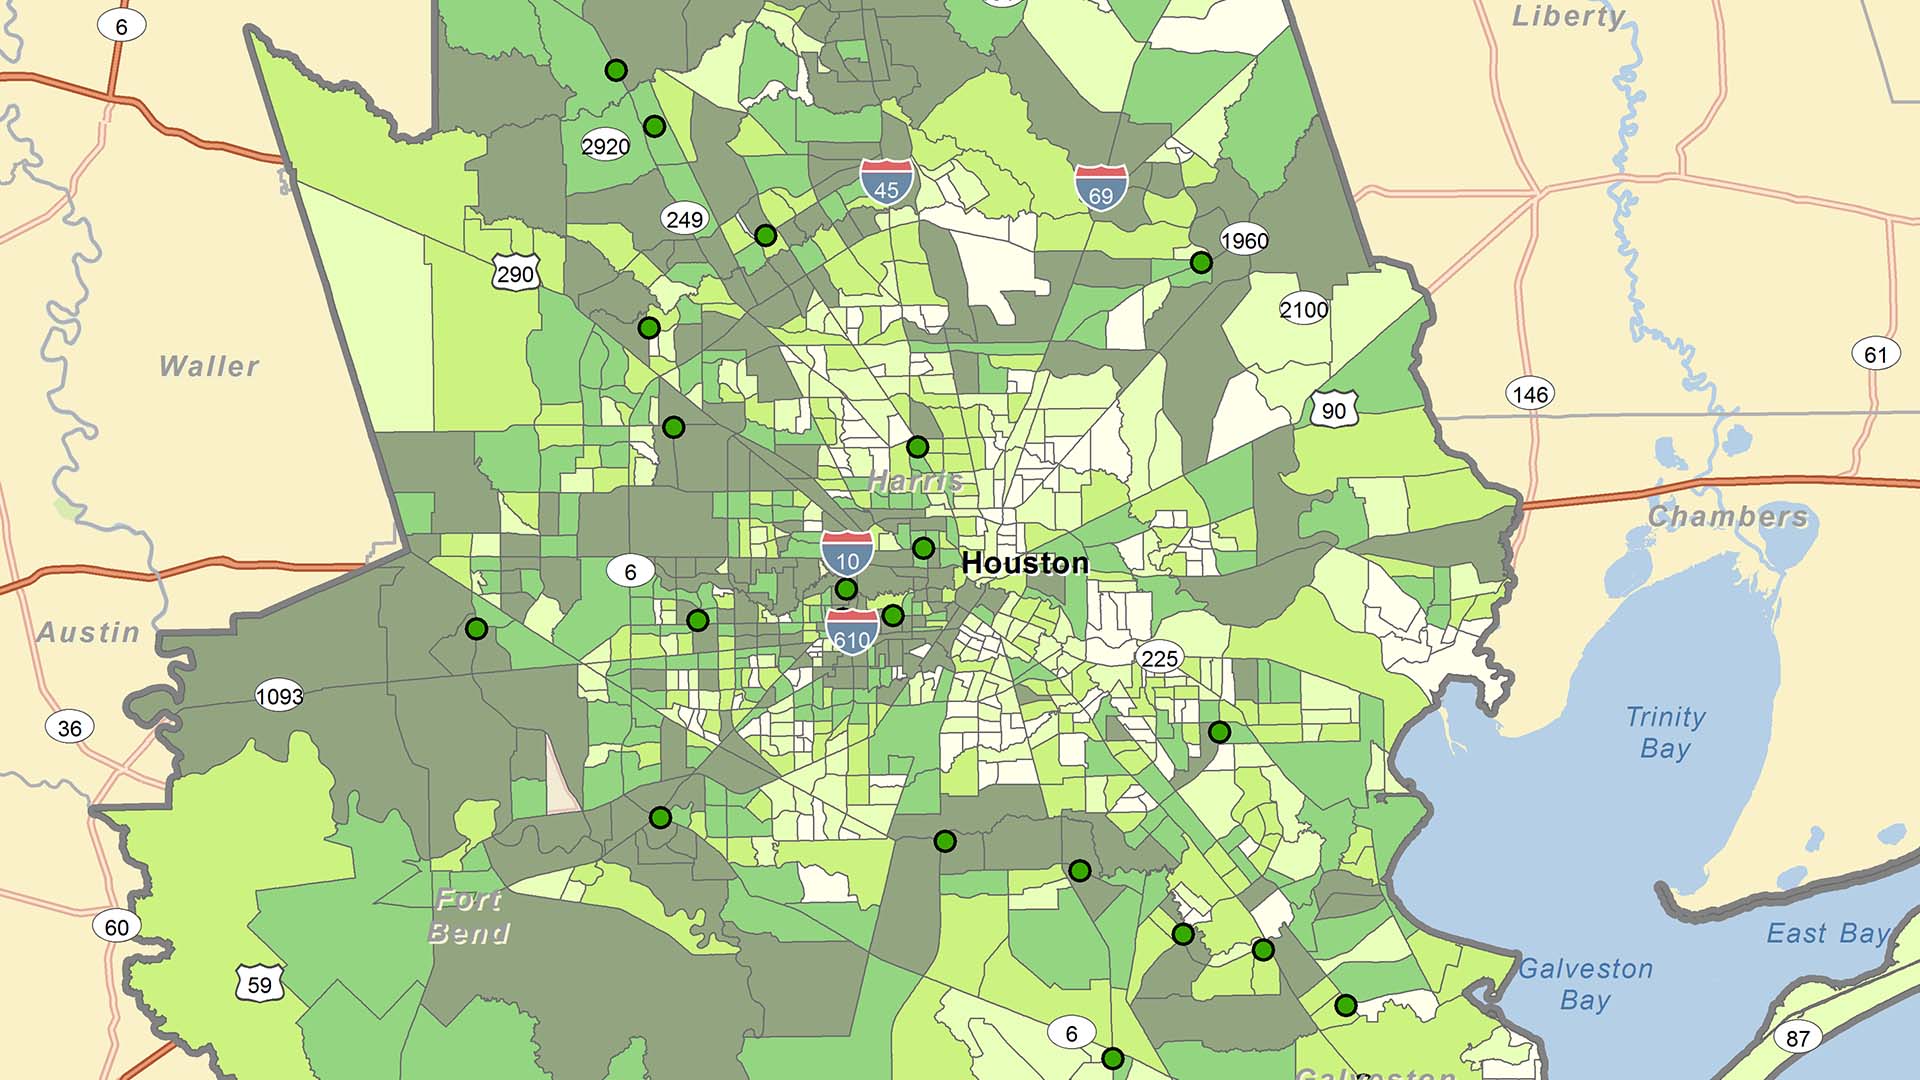 A map showing lending inside the Houston Assessment Area by Regions Bank's Peer Banks